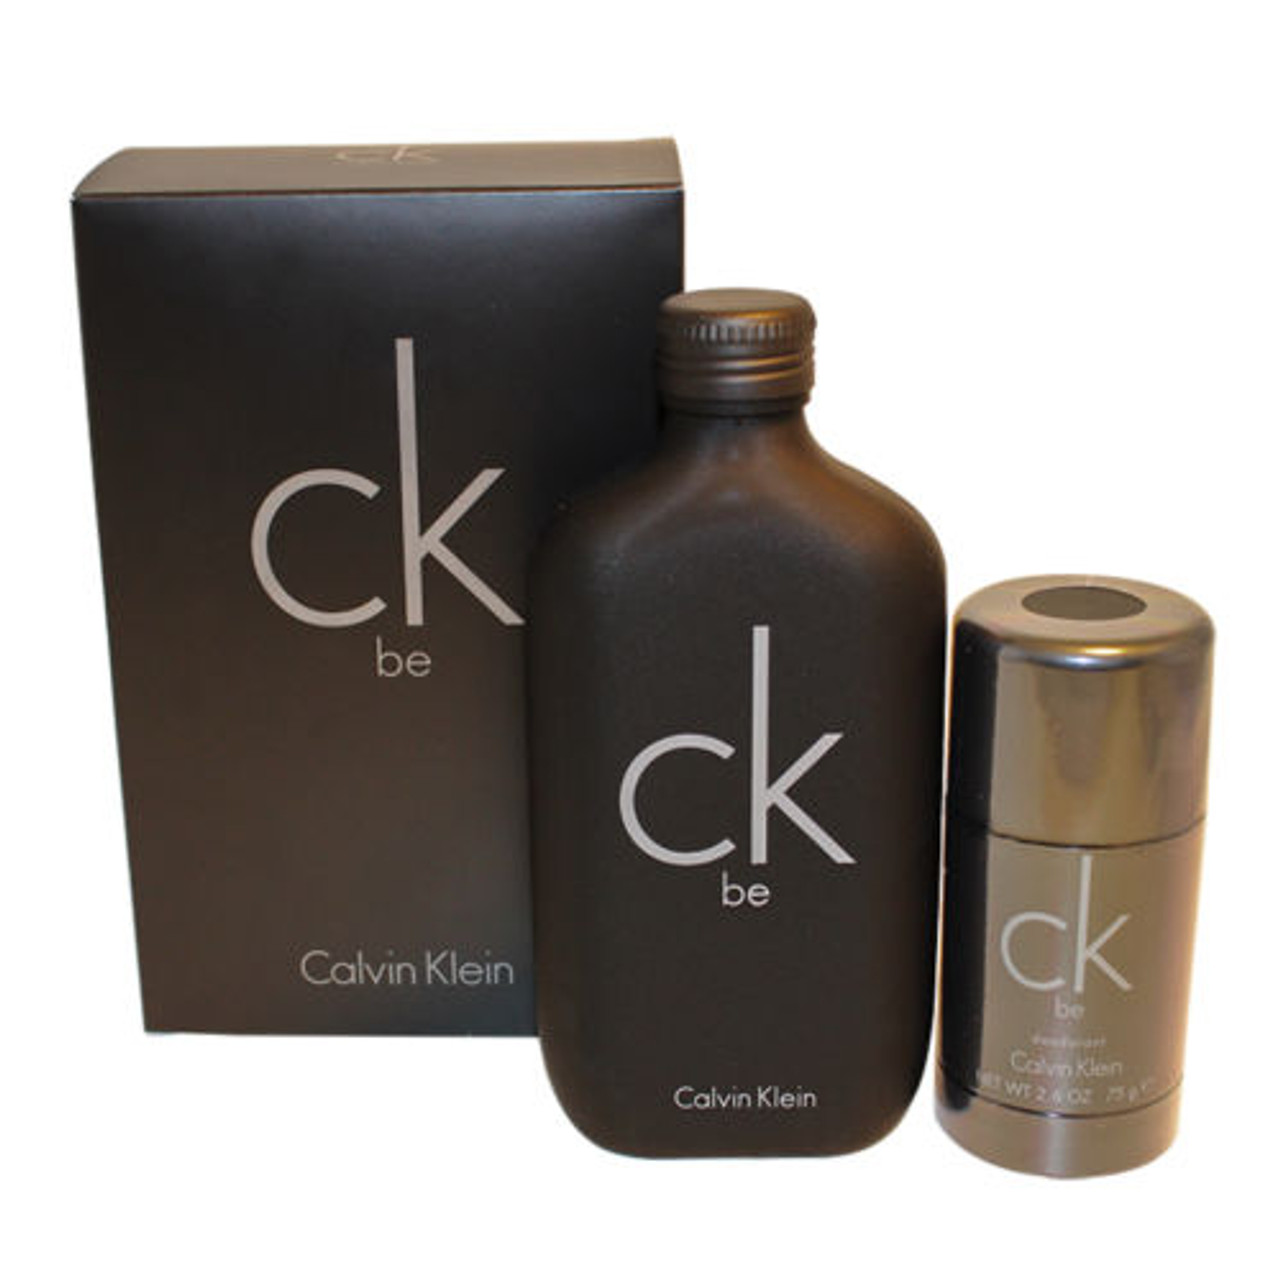 CK Be by Calvin Klein 2pc Gift Set EDT 6.7 oz + Deo Stick 2.6 oz for Unisex  - ForeverLux